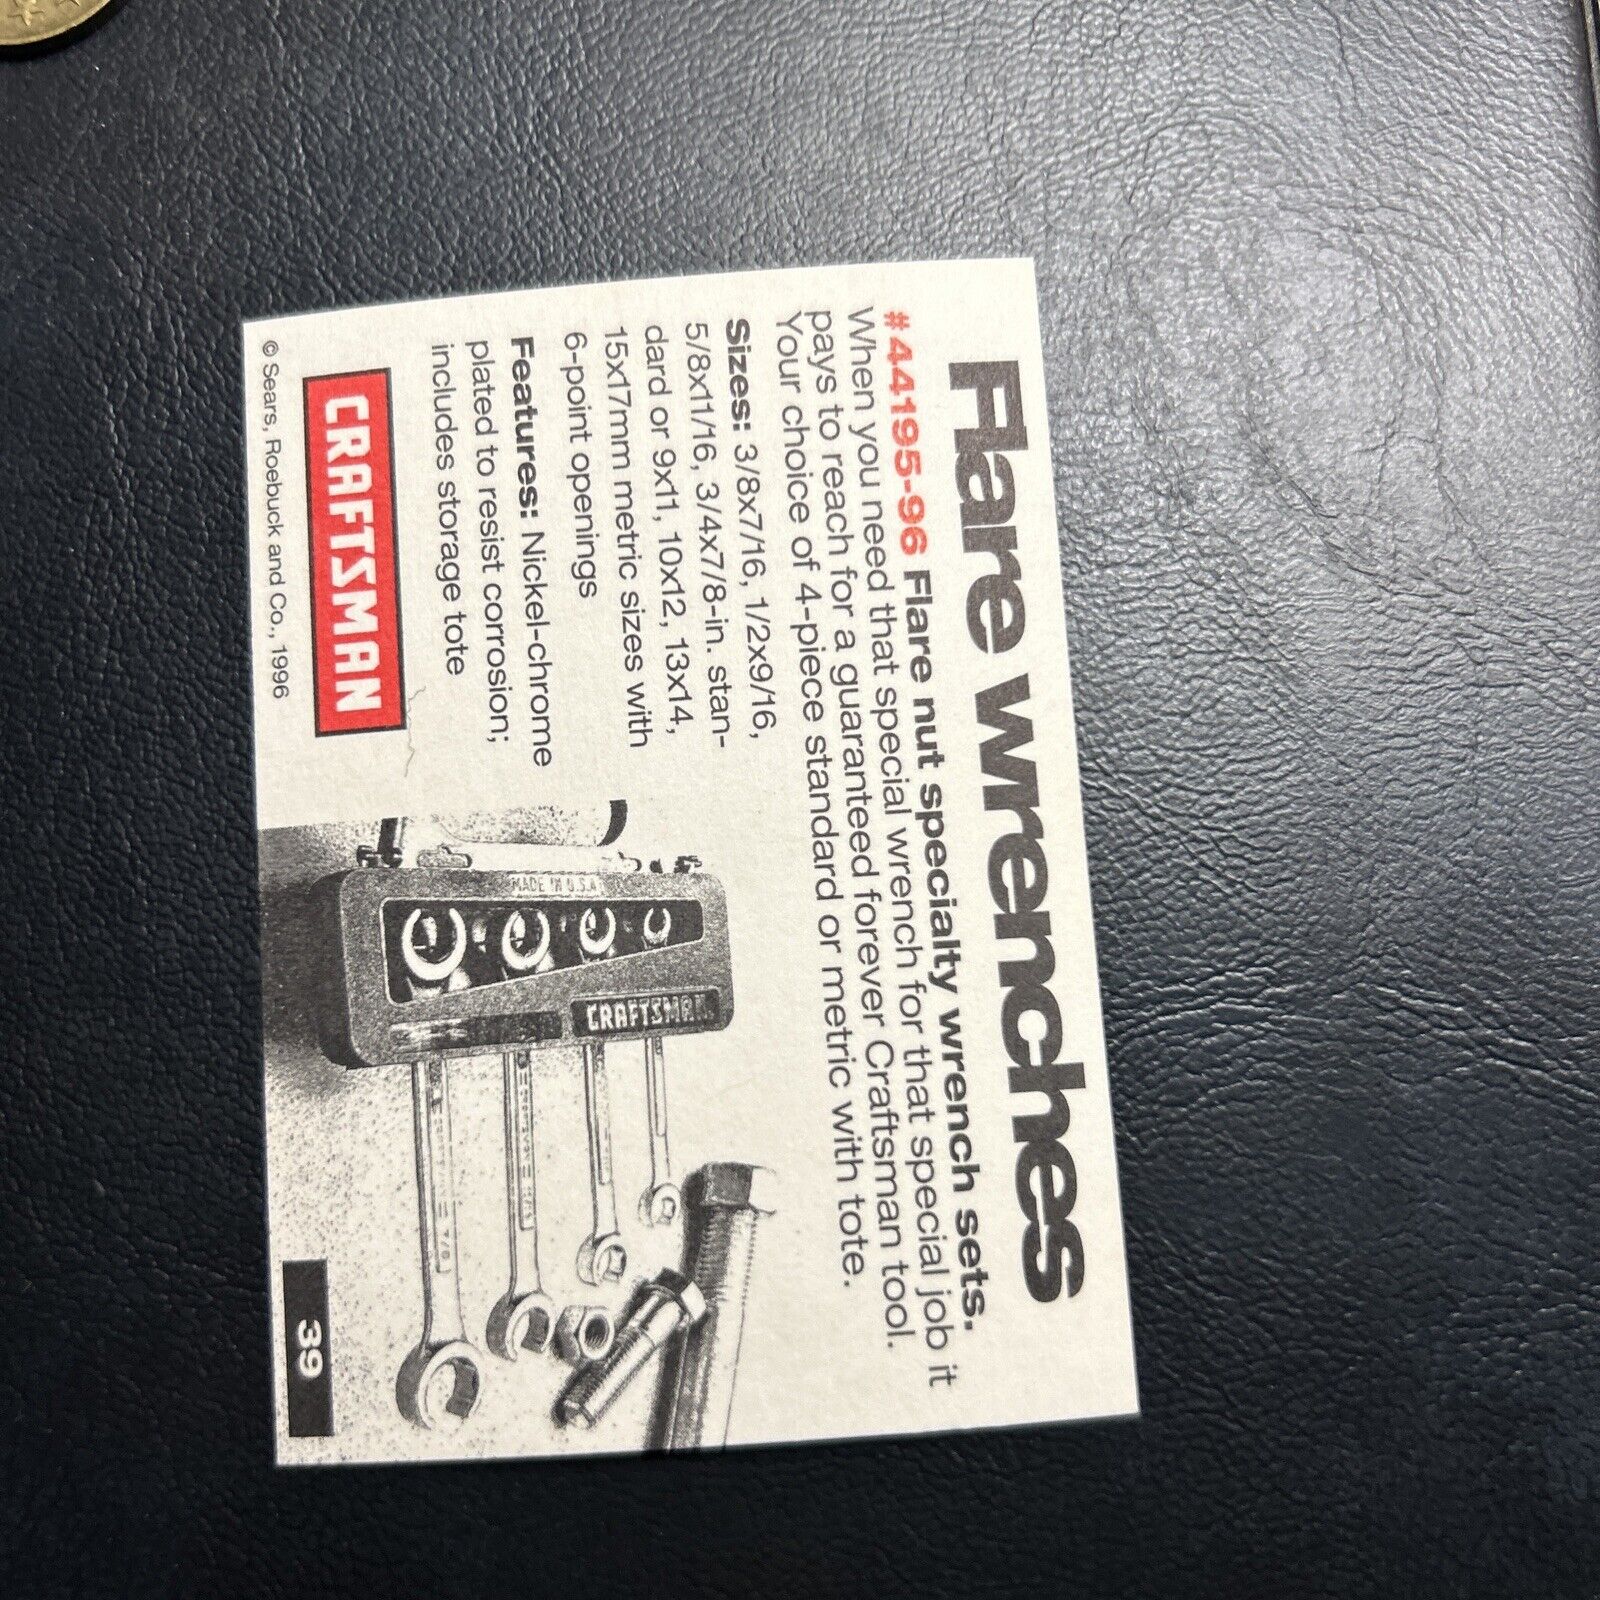 Jb98 Craftsman Card Sears Roebuck 1996/97 #39 Flare Nut Wrenches